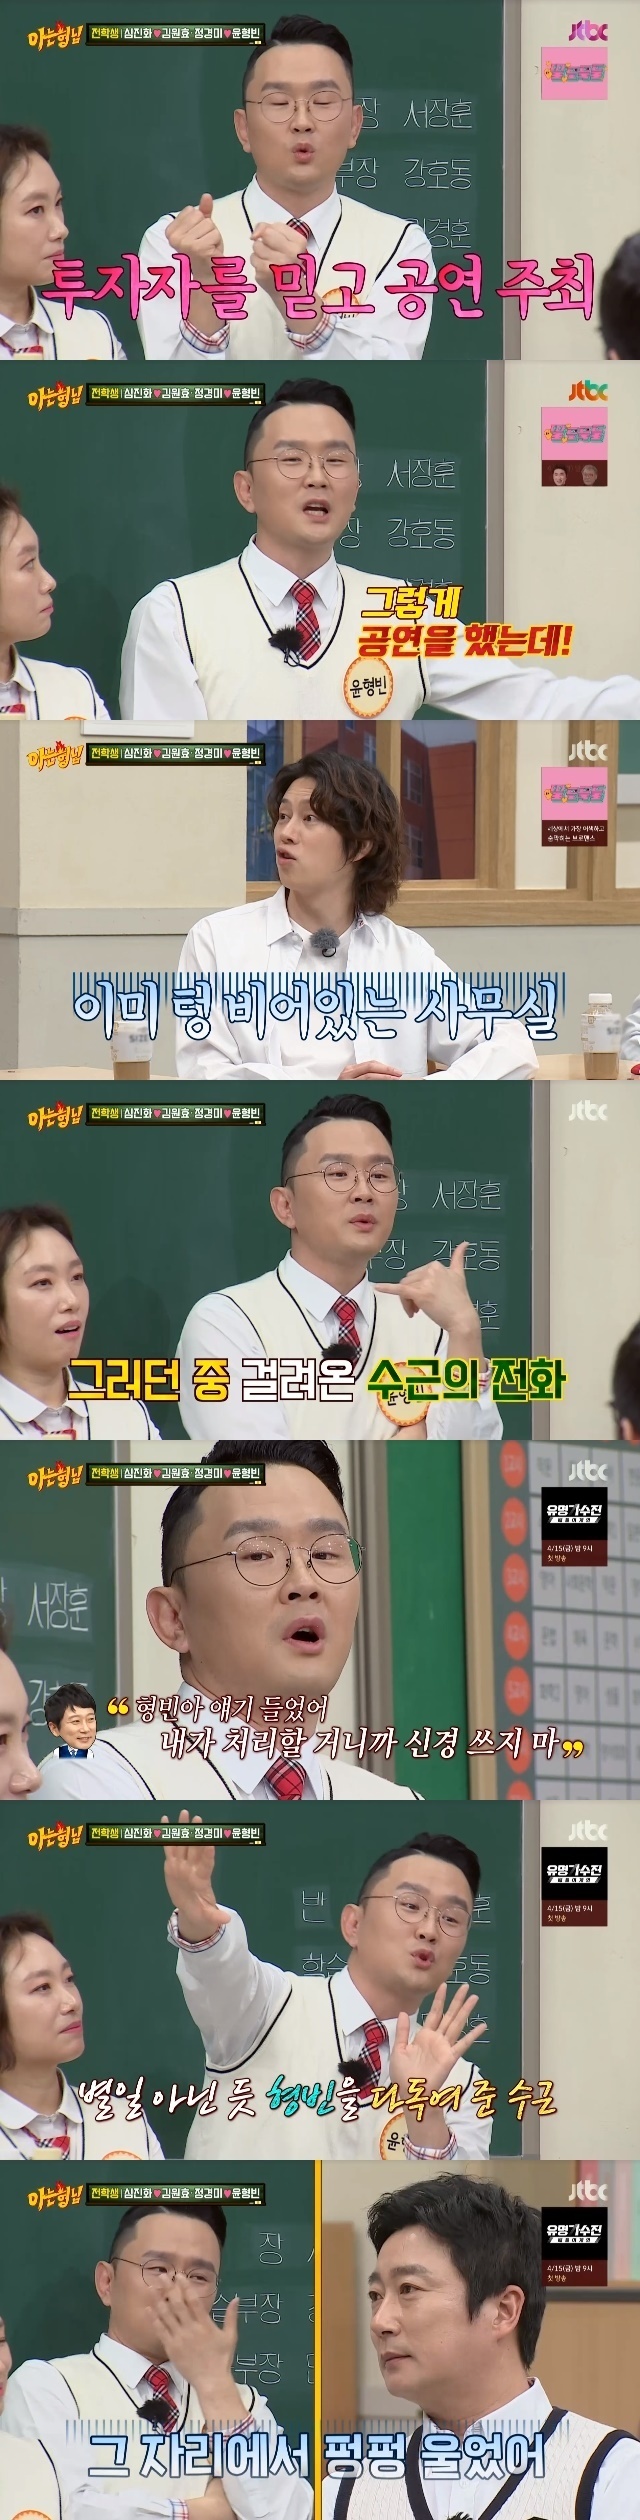 Yoon Hyeong-bin told the story of Lee Soo-geun crying at the moment of hundreds of millions of investment fraud.In the 327th JTBC entertainment Knowing Bros (hereinafter referred to as Brother) broadcast on April 9, Kim Won-hyo and Shim Jin-hwa, Yoon Hyeong-bin and Jung Kyung-mi came to their brothers school.On this day, Yoon Hyeong-bin told Lee Soo-geuns story with his past experience of fraud.Yoon Hyeong-bin said, The business was difficult after Corona, but I was scammed for hundreds of millions of won at the end of the year.I was making a comedian performance at that time, so I had someone to invest in it, and I gathered my colleagues. I performed and the investor did not pay and disappeared.I really saw it in the movie. I went to the office where I met with him, and he went to the office, and he was empty, and he had a bill.I have to pay my colleagues because I have collected all my colleagues, he said. I did not have the money I received, and I gave it to me for my money.I was so worried about how I could get the money around me and give them some and give them the rest.I dont go to the Chicken house near the house to talk about anything else. I ate Chicken and had a beer and just had a funny story.Then it was just time to go, and Su-geun said, I heard about my brother, Im going to handle it, so do not worry.I saw him turn around and then he disappeared and then he sat there crying, so thank you, said Yoon Hyeong-bin.